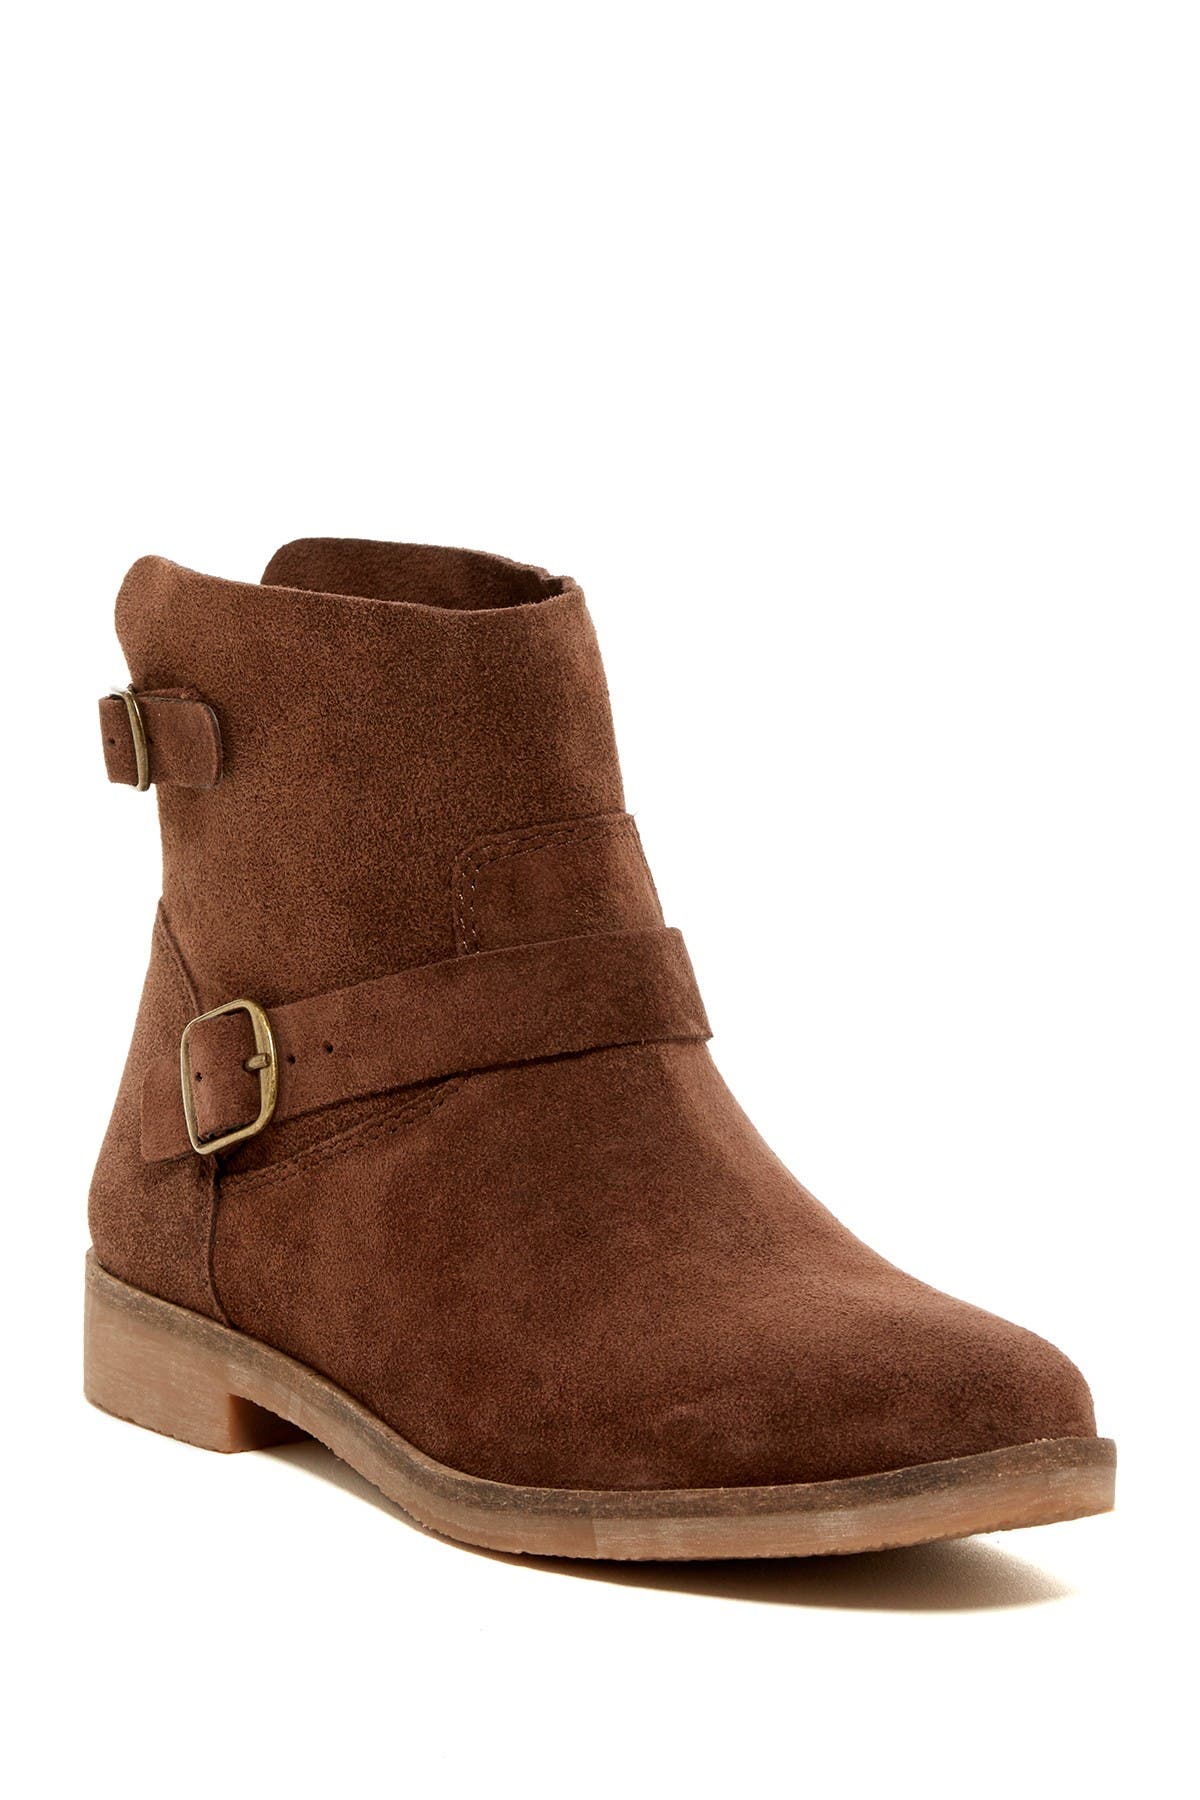 lucky brand ankle boots nordstrom rack